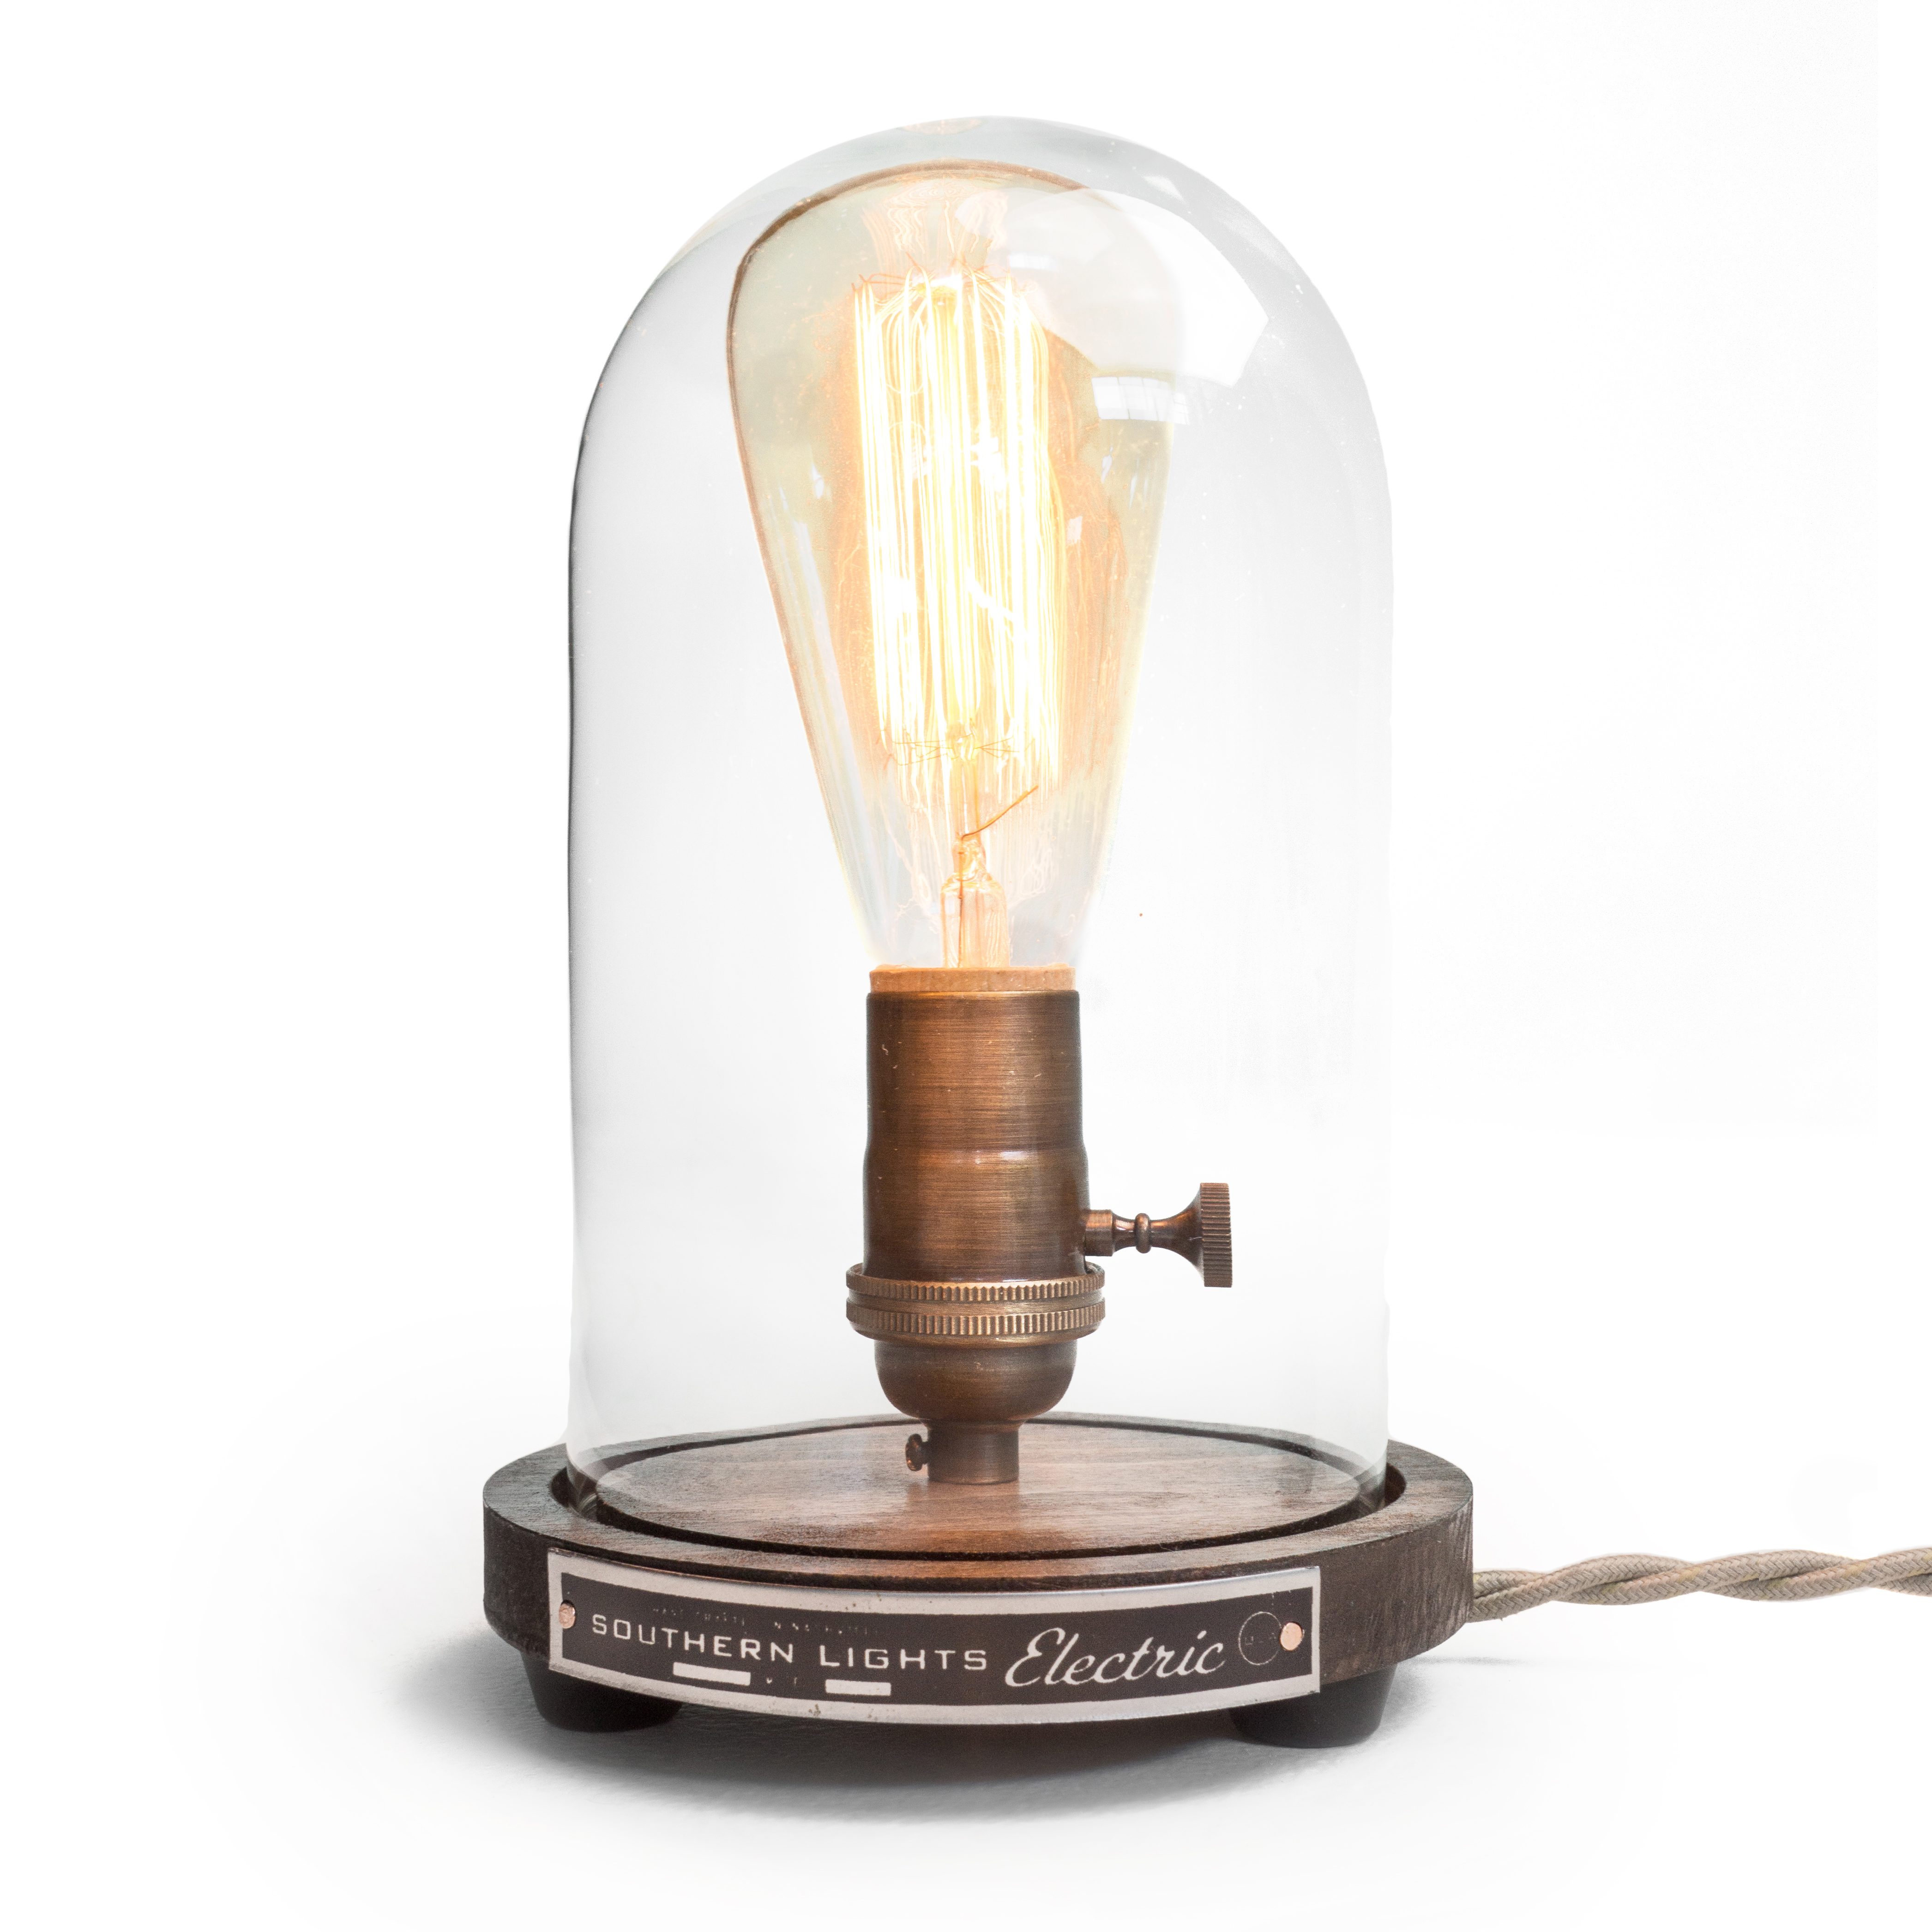 Southern Lights Electric The Original Bell Jar Table Lamp | Huckberry